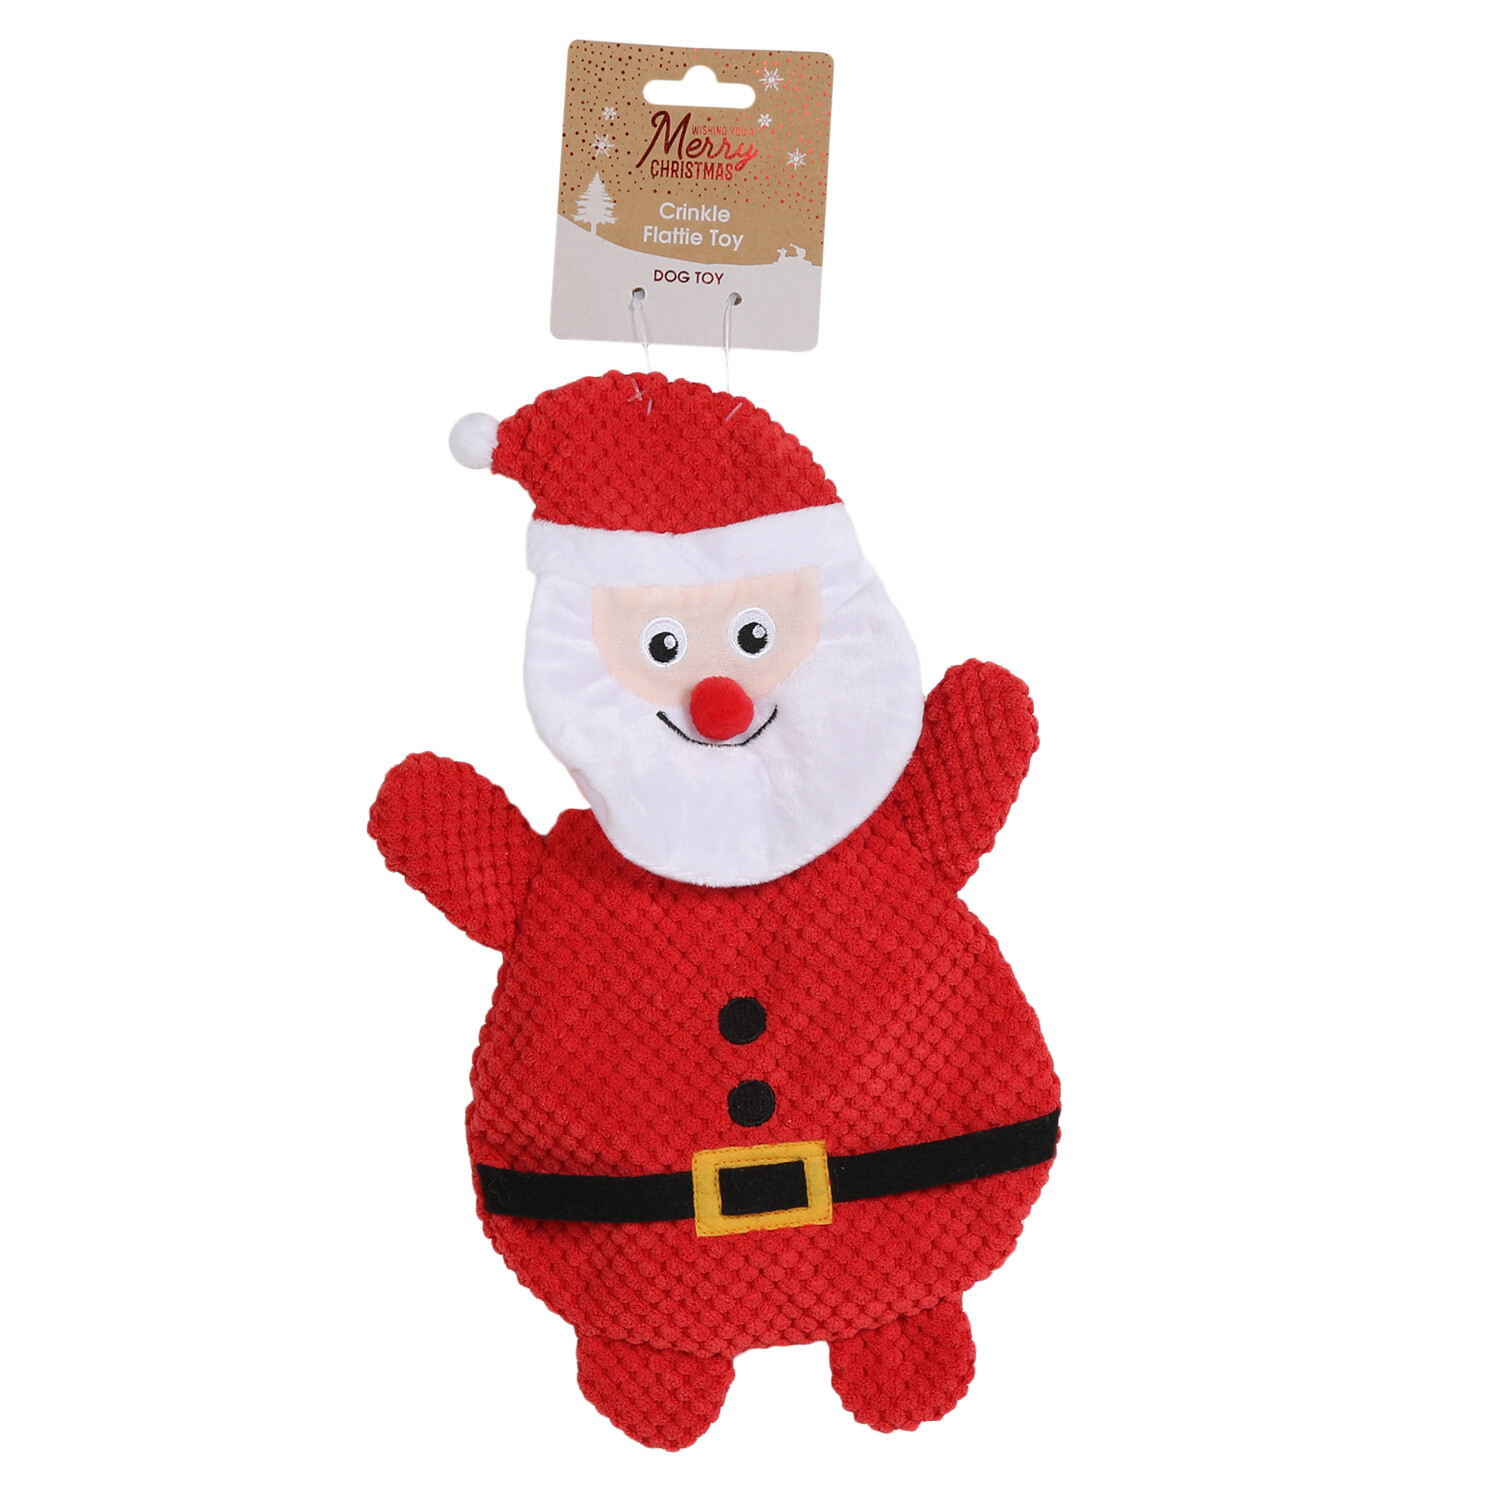 Single All I Want For Christmas Crinkle Dog Toy in Assorted styles Image 2